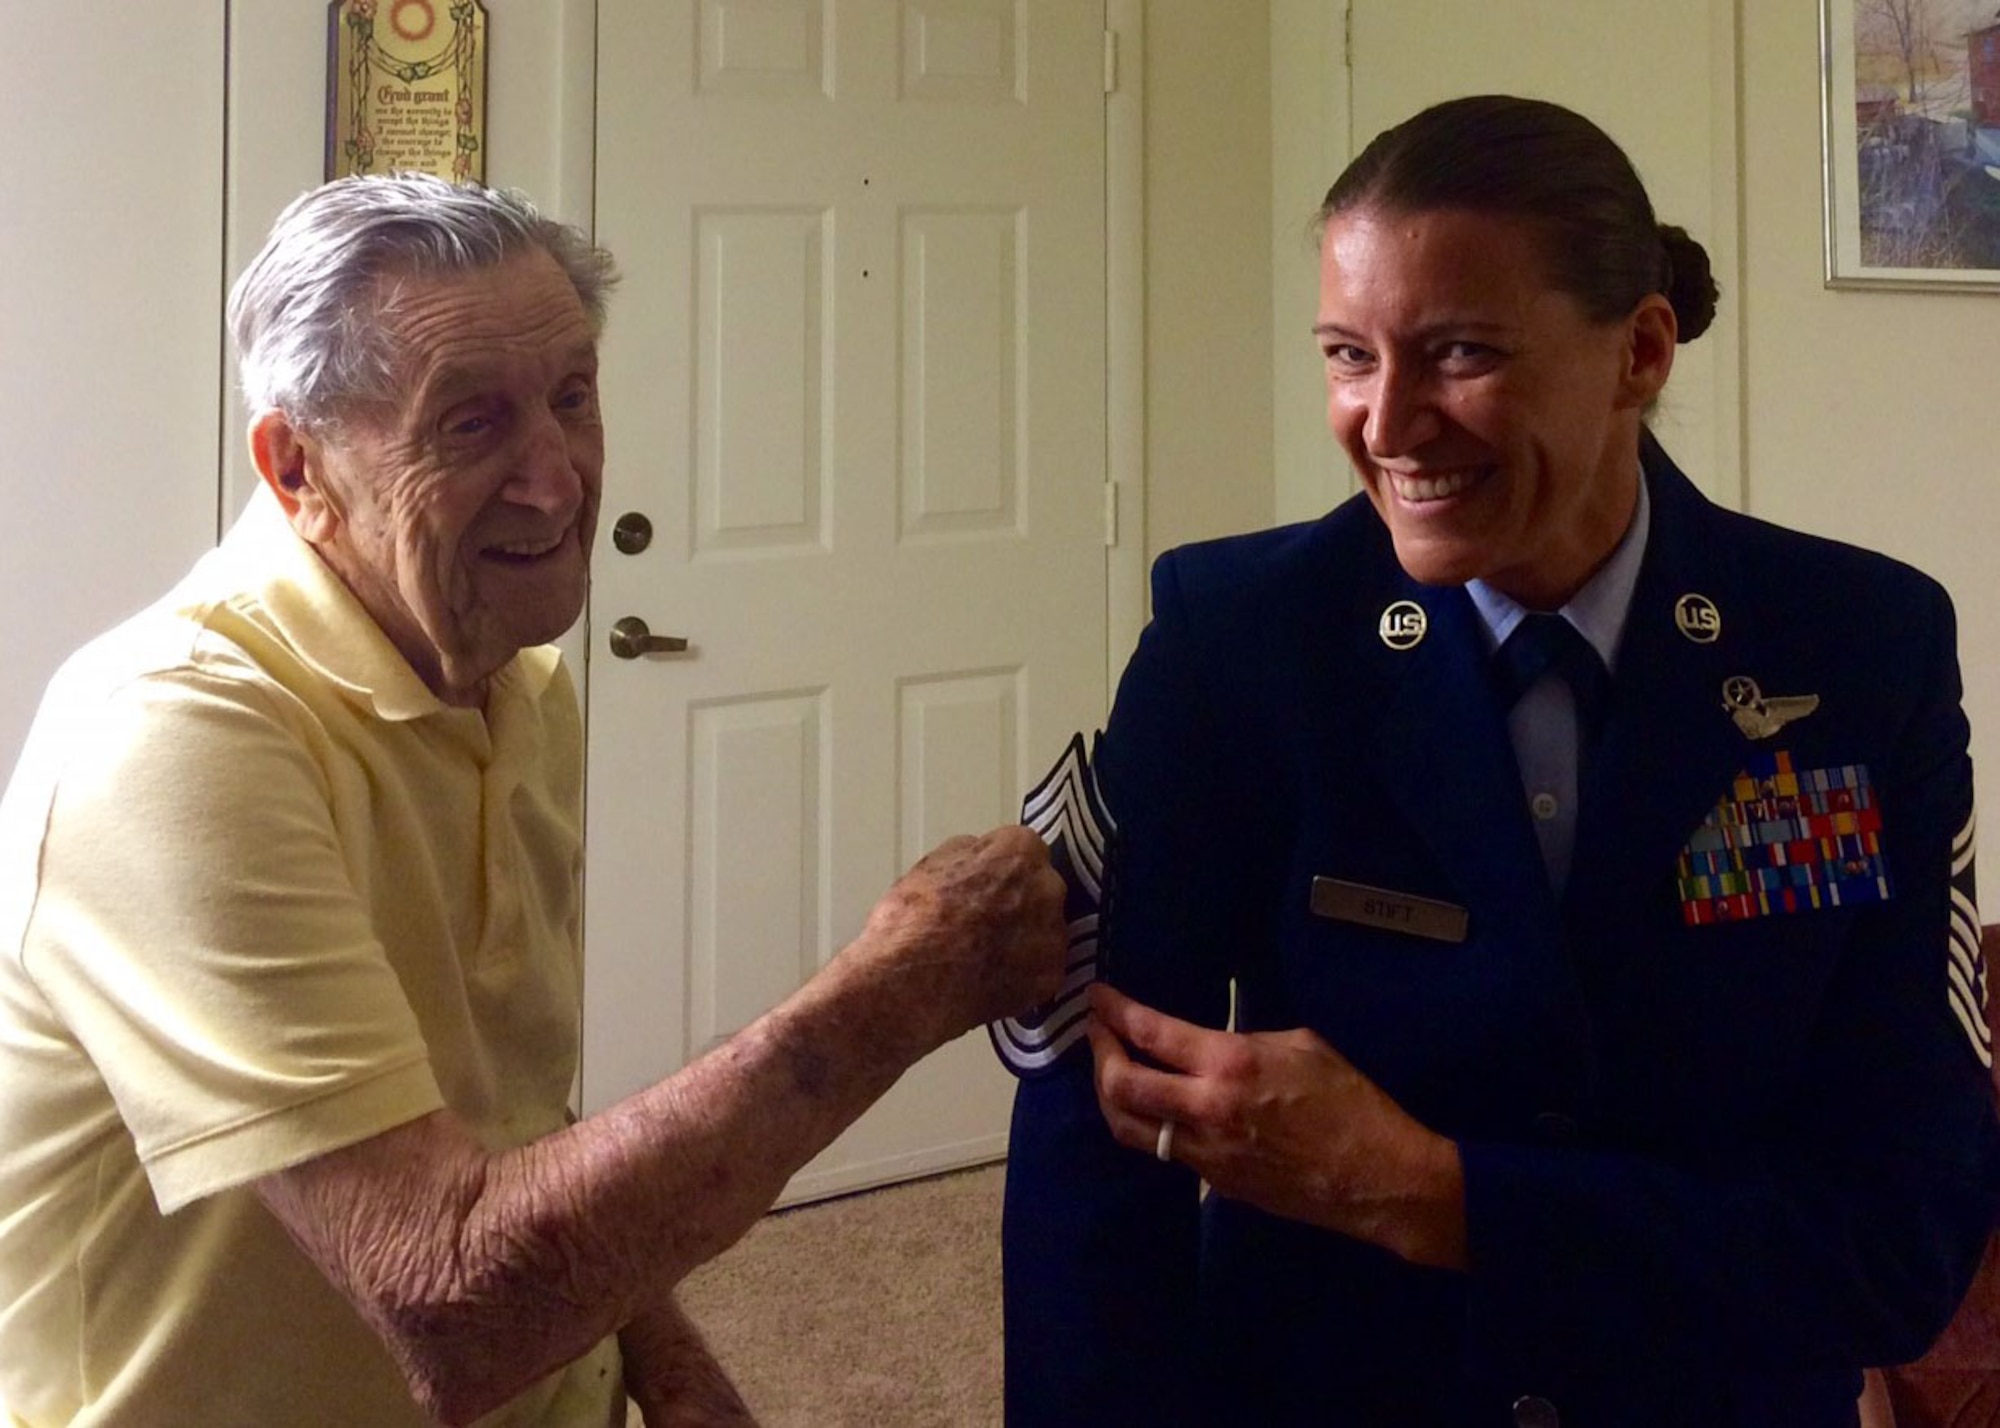 U.S. Air Force Lt. Col. (retired) Joseph S. Pesek, tacks chief master sergeant stripes onto his grandaughter Chief Master Sgt. Amanda J. Stift in 2015. Stift is the 403rd Wing command chief master sergeant and shares her grandfather's account of Dec. 7, 1941. Pesek is a World War II veteran who served in the U.S. Army Air Forces and U.S. Air Force. He was a technical sergeant stationed at Hickam Field, Hawaii, during the attack on Pearl Harbor. (Courtesy photo)